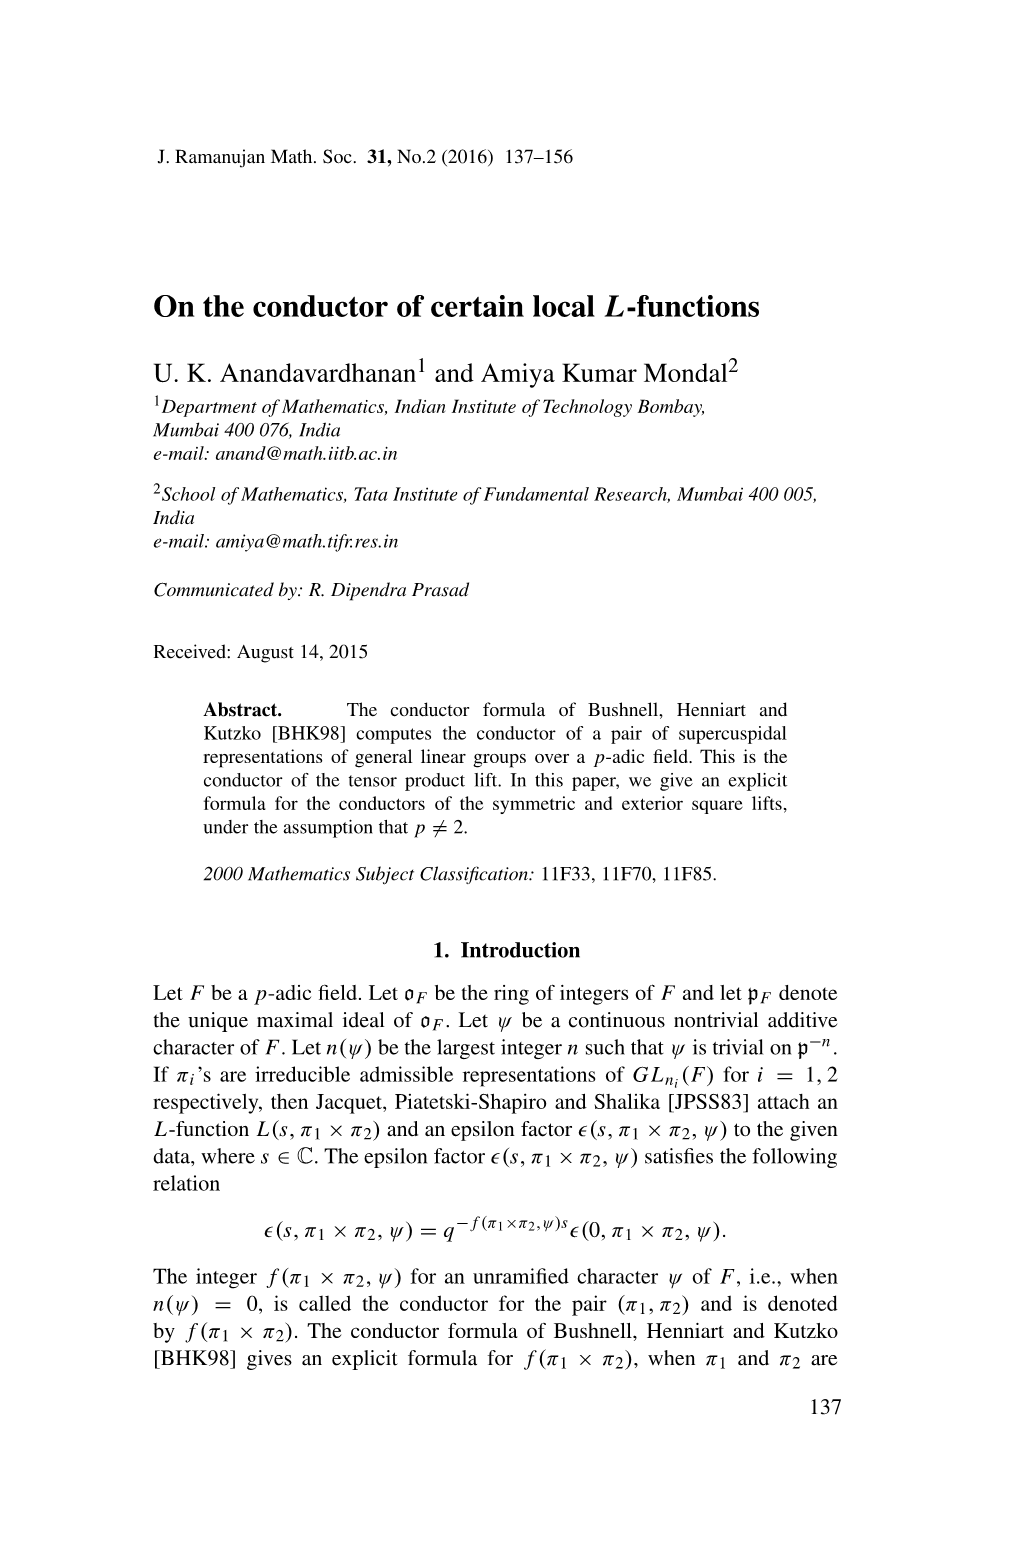 On the Conductor of Certain Local L-Functions